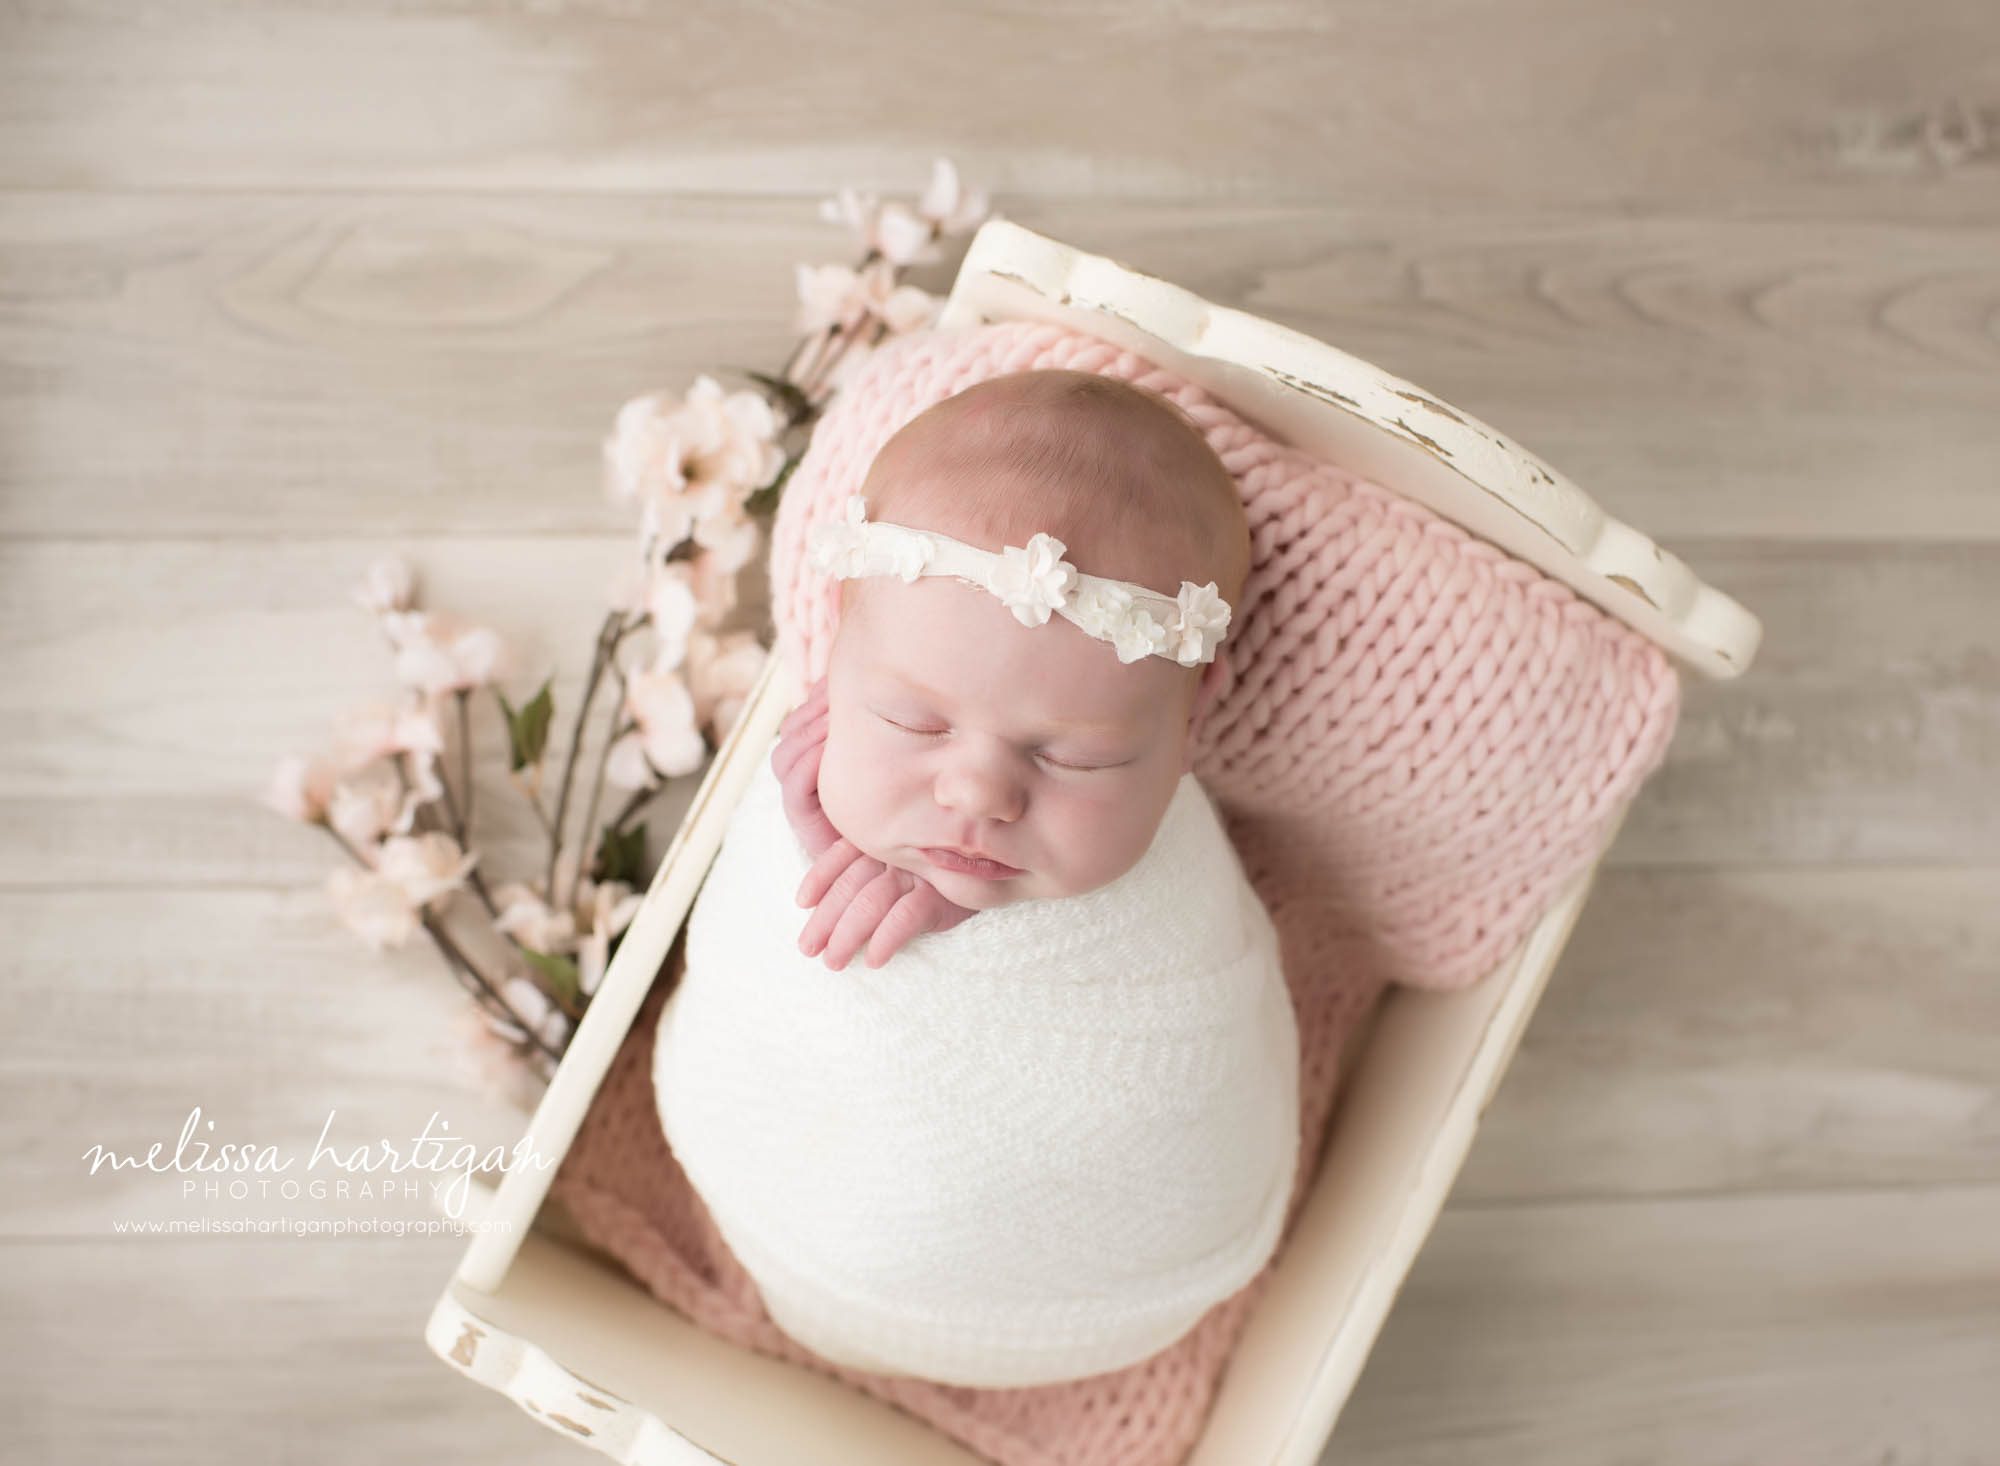 Melissa Hartigan Photography Connecticut Newborn Photographer in Coventry baby girl sleeping in white wooden bed wrapped in cream on pink blanket wearing white headband